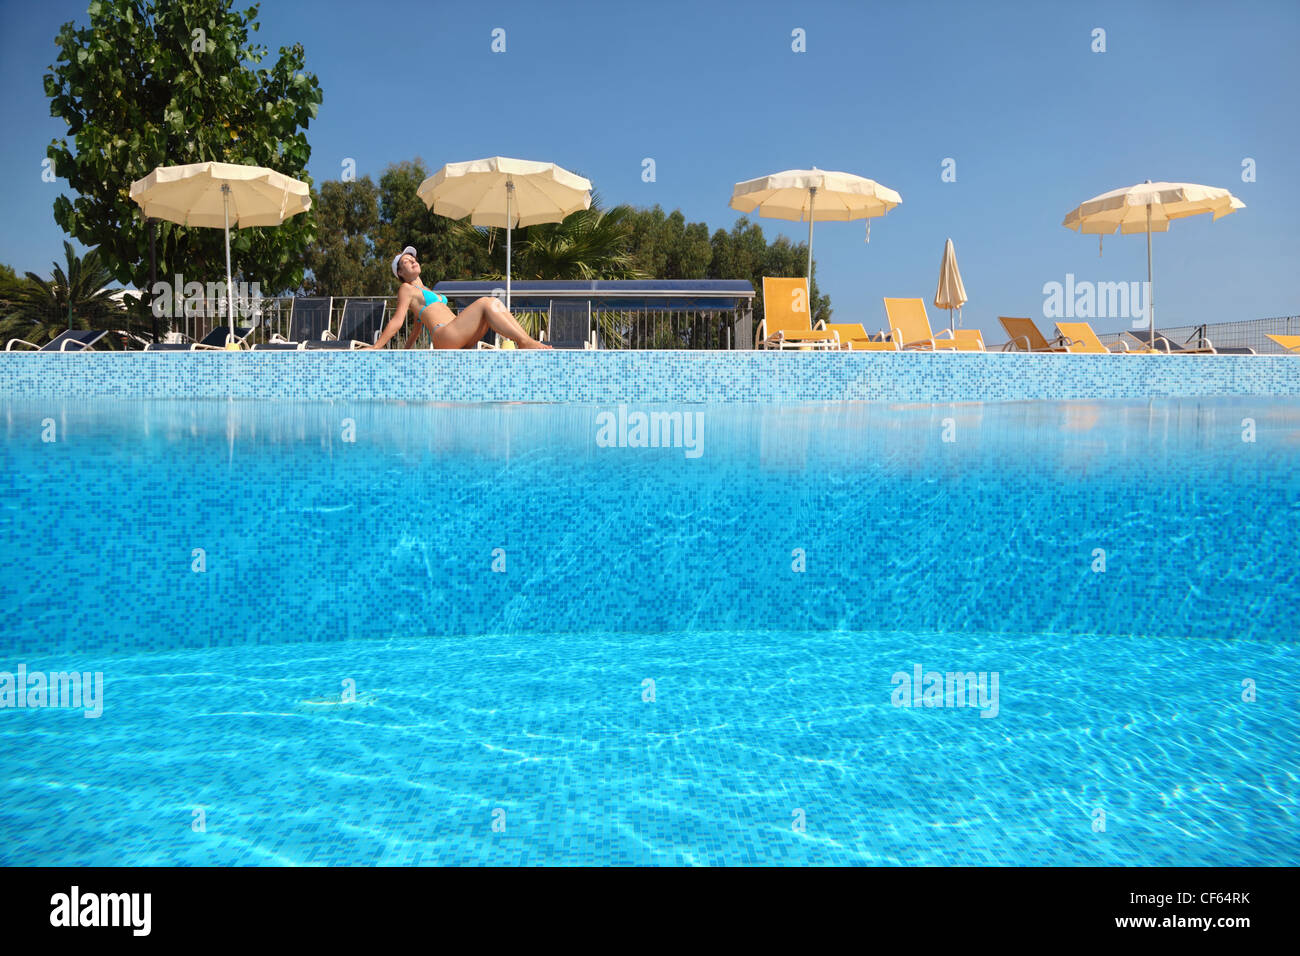 Woman becomes tanned near  pool under open-skies in  day-time near deck-chairs and umbrellas, underwater half photo Stock Photo